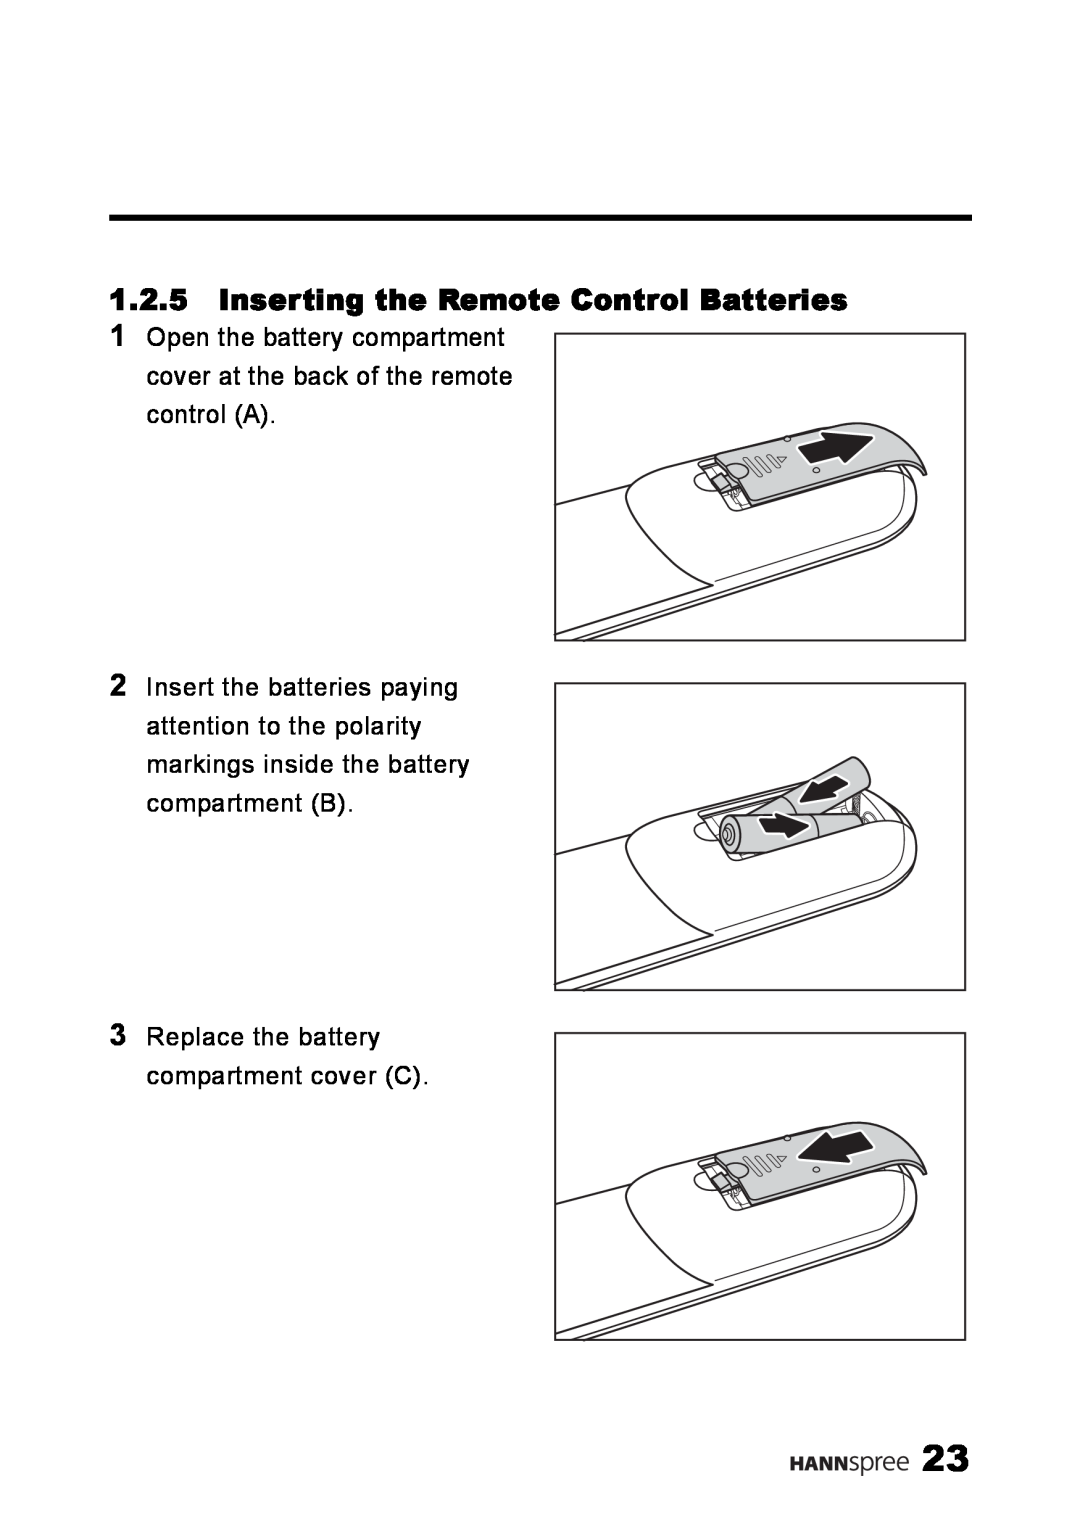 HANNspree MAK-000039 manual Inserting the Remote Control Batteries 